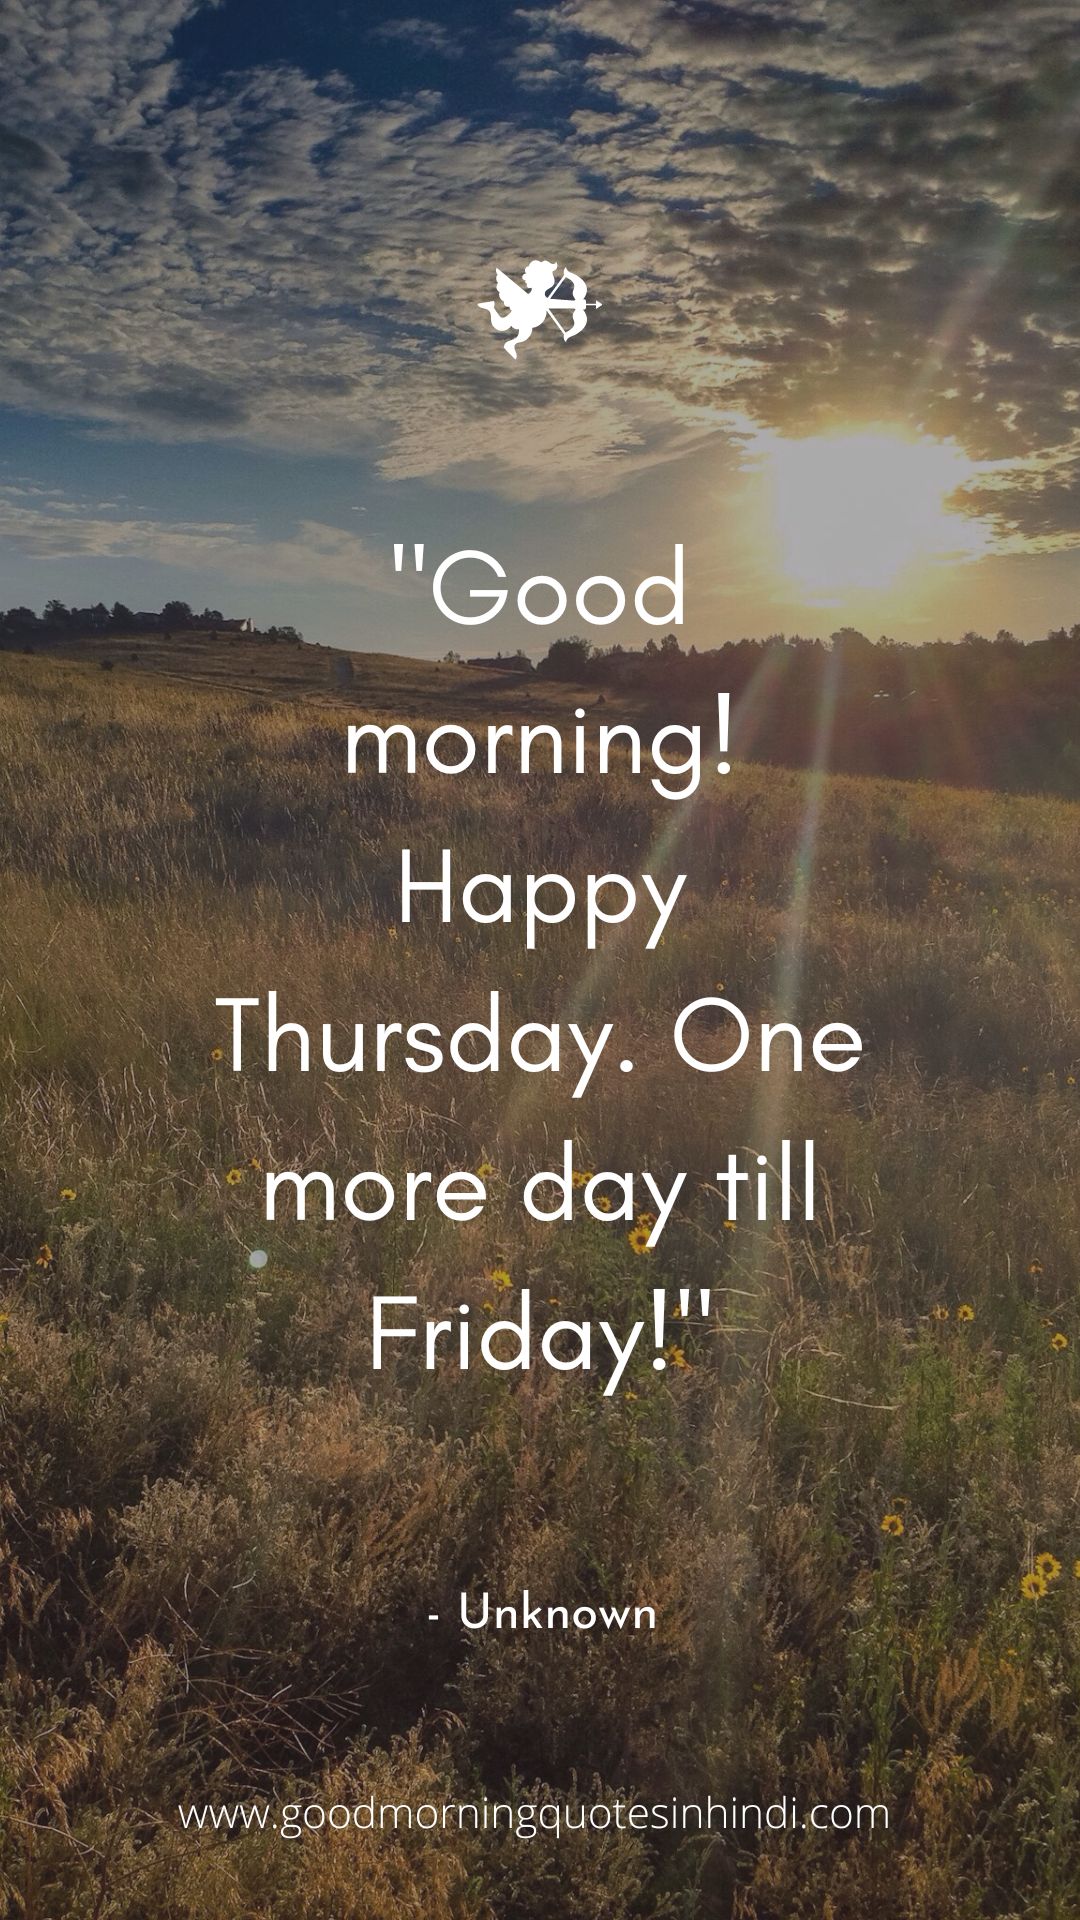 90+ Uplifting Good Morning Quotes for Thursday: Happy Thursday Quotes